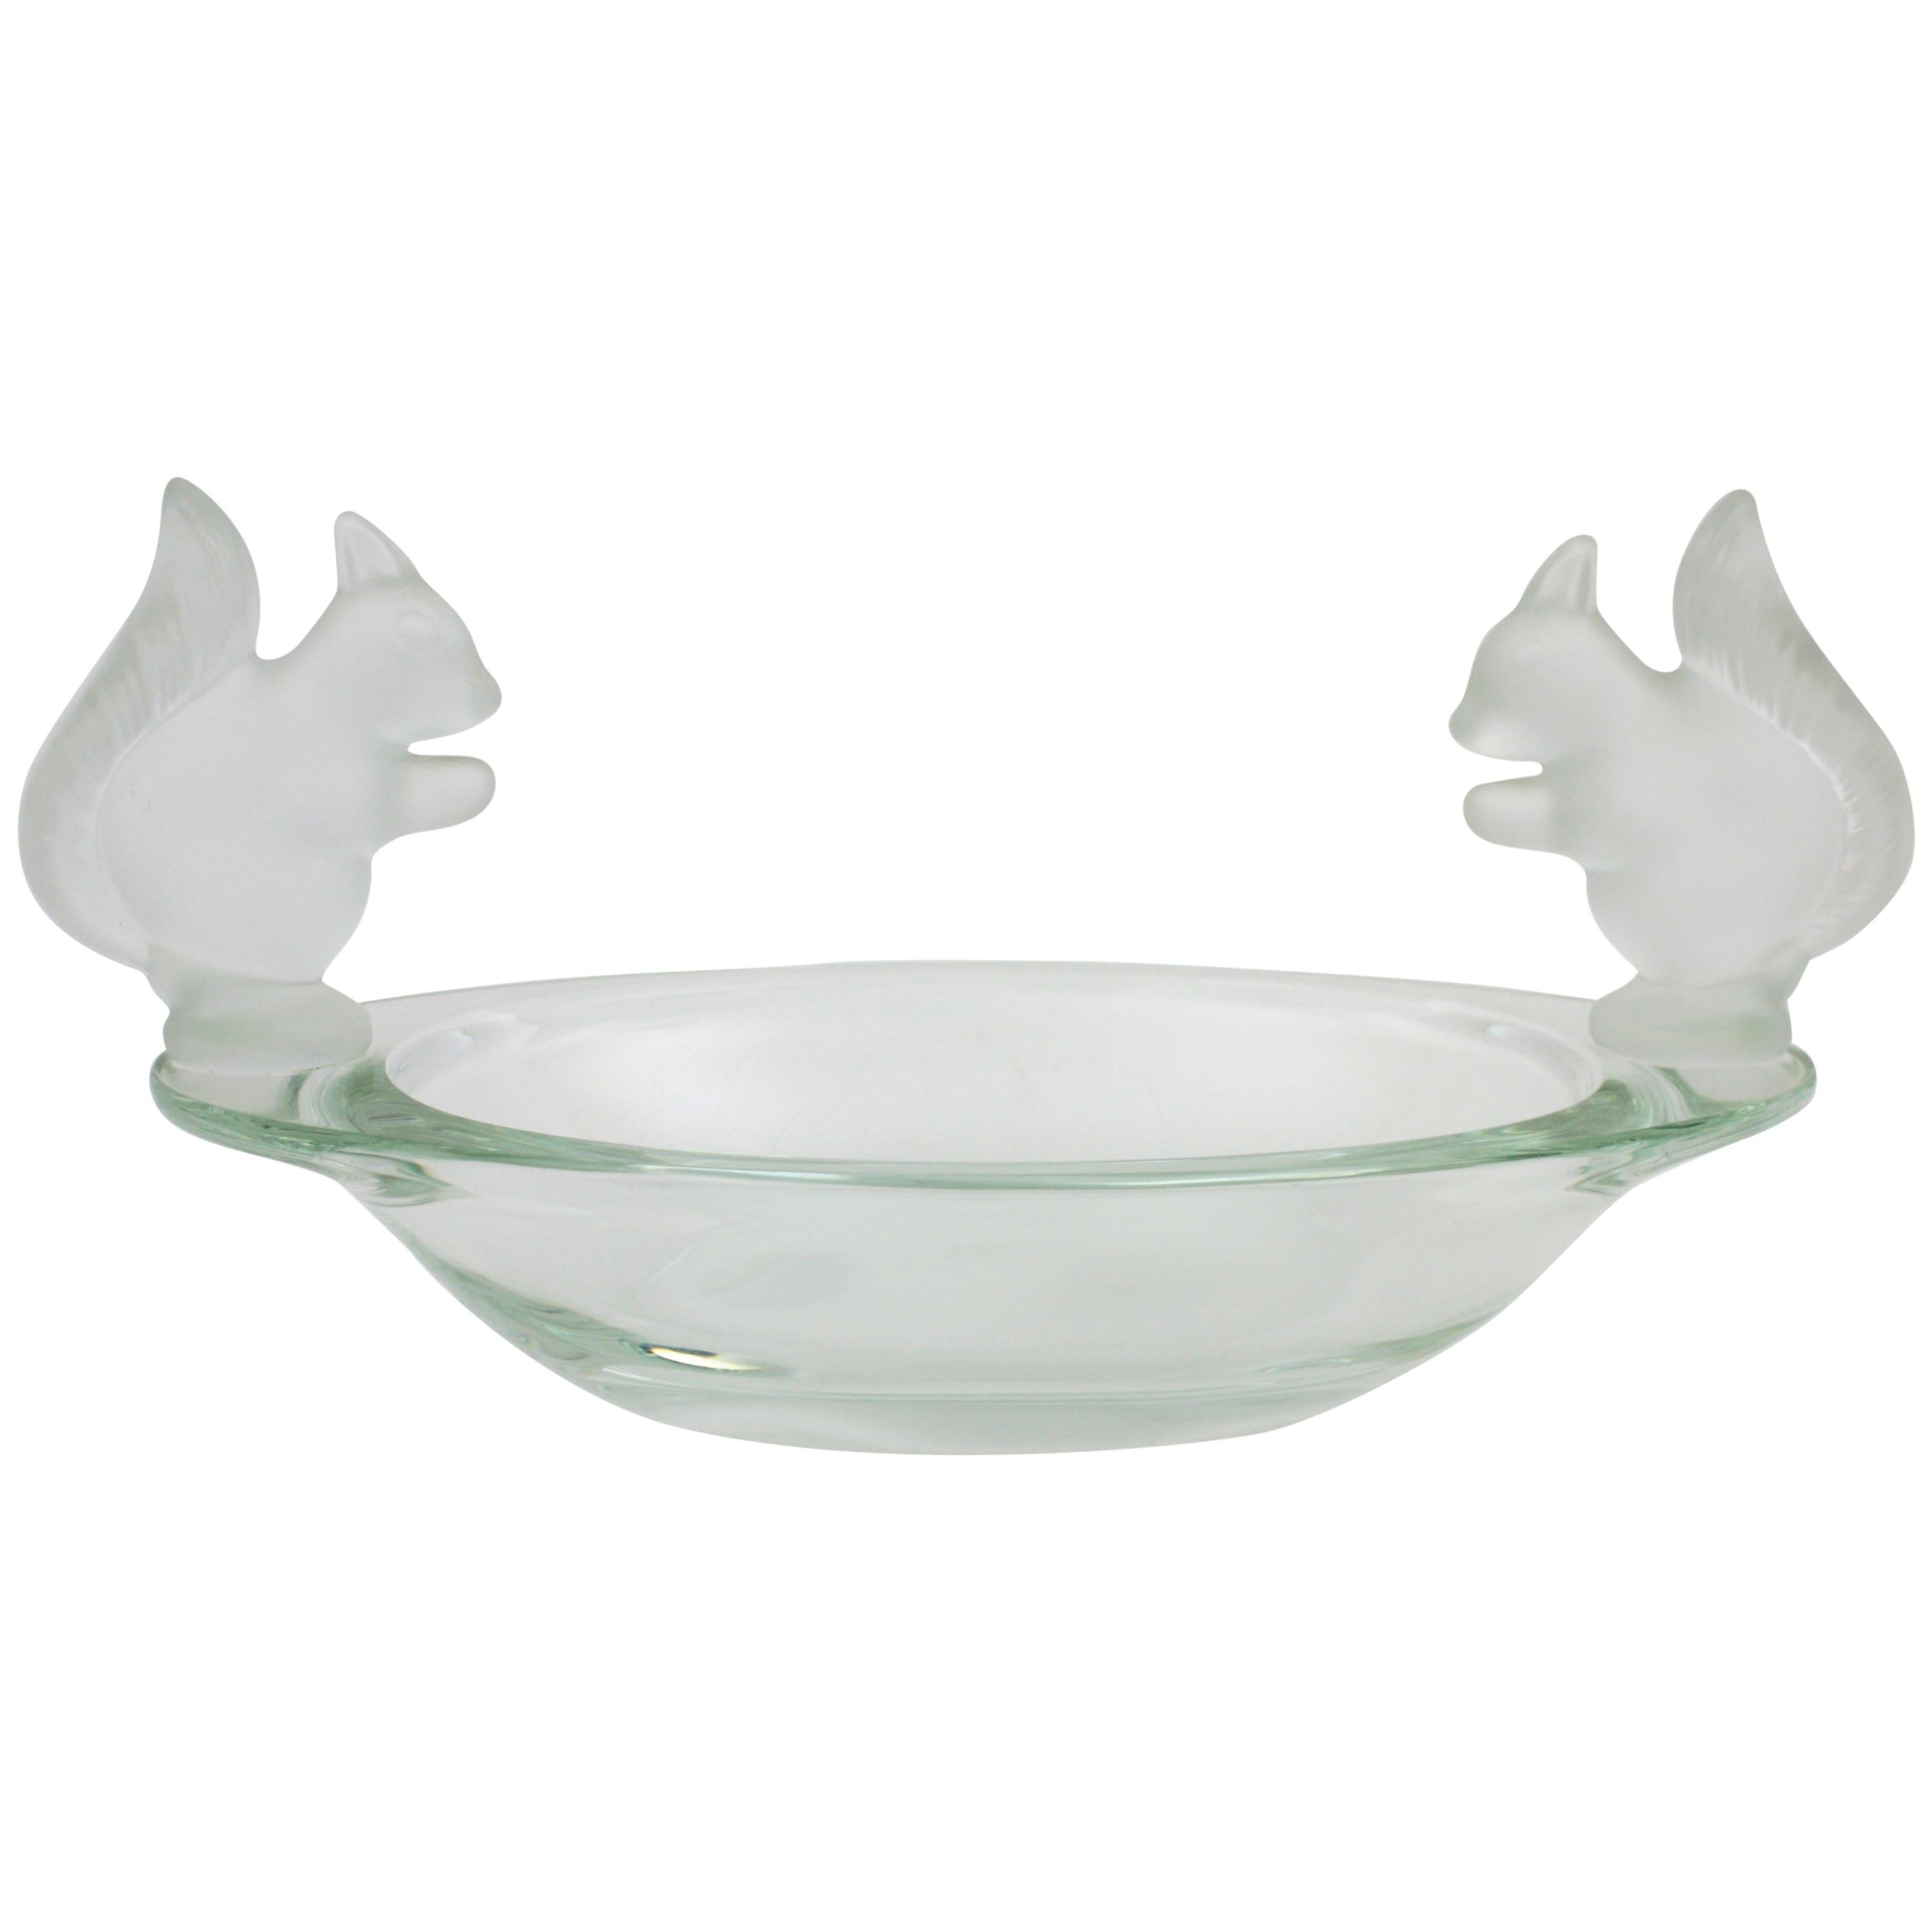 French Sevres Crystal Oval Bowl Decorated by Frosted Crystal Squirrel Figures